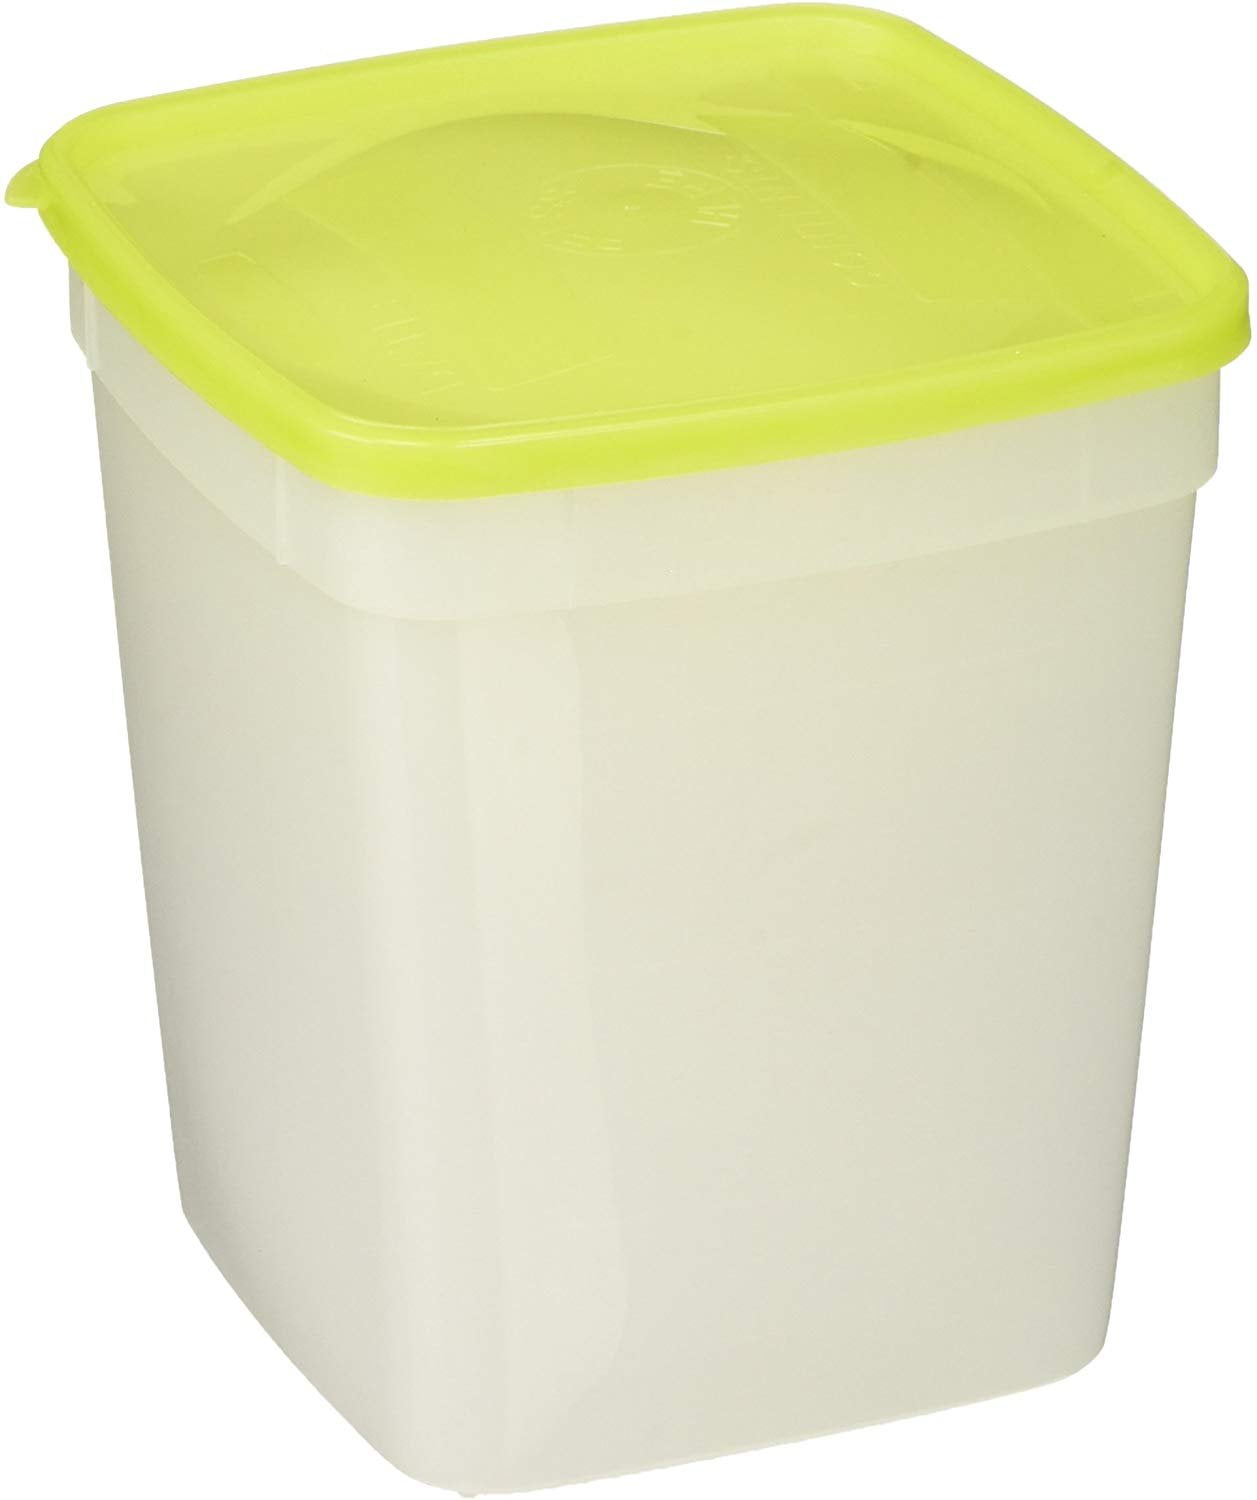 Freezer Containers-3 1 qt. - Morgan County Seeds